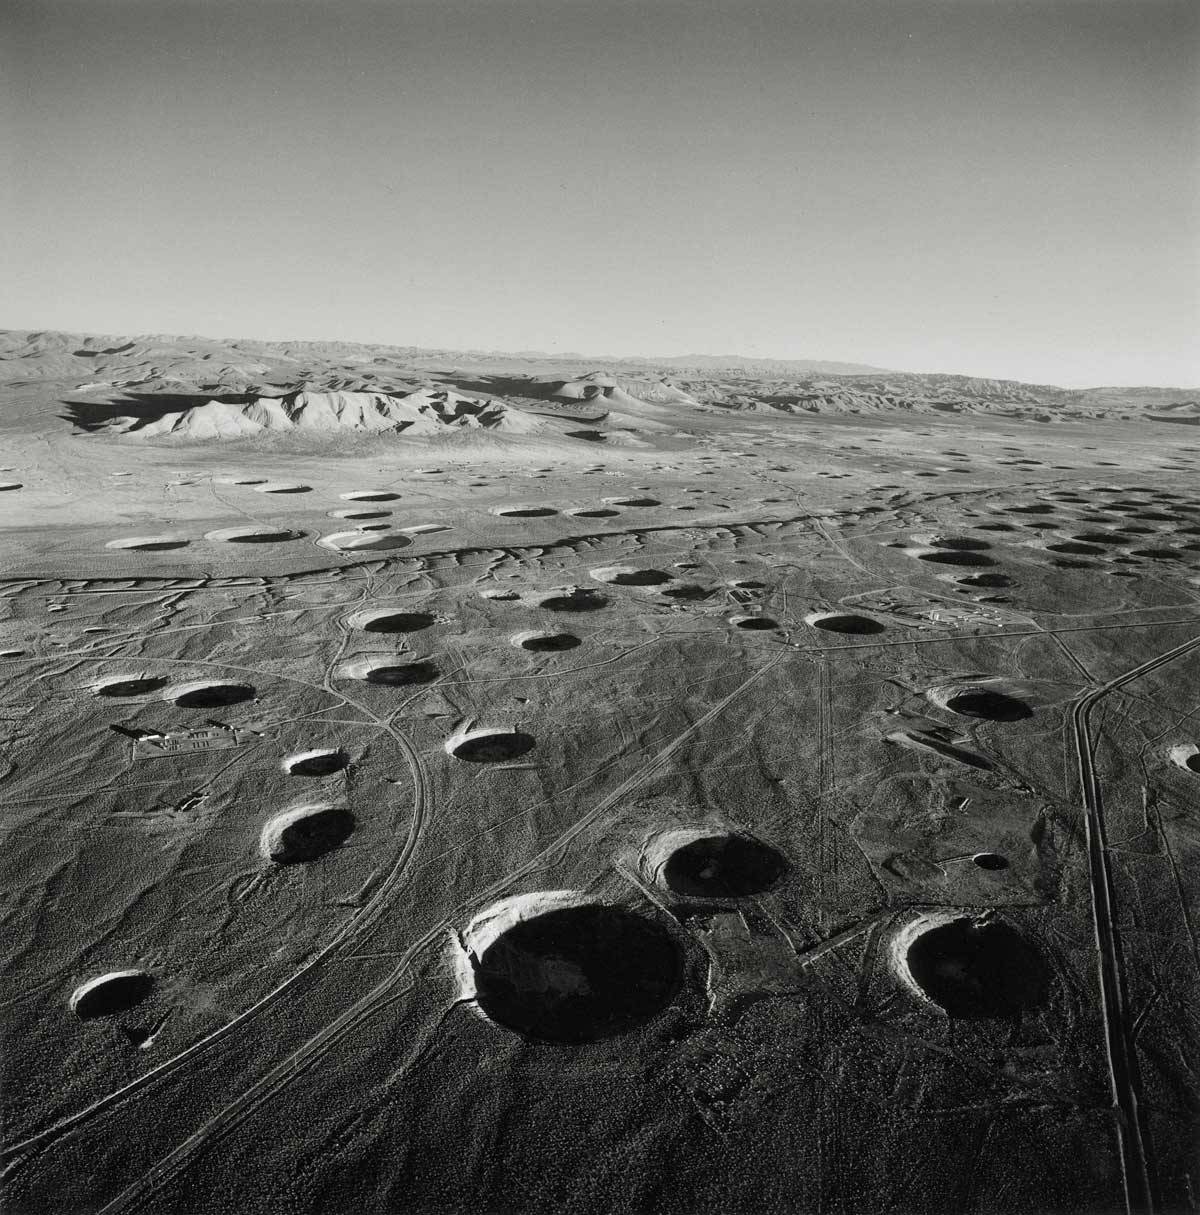 Emmet Gowin, SUBSIDENCE CRATERS, LOOKING SOUTHEAST FROM AREA 8, YUCCA FLAT, NEVADA TEST SITE, 1996. (From THE NEVADA TEST SITE by Emmet Gowin, with a foreword by Robert Adams, Princeton University Press, 2019.)